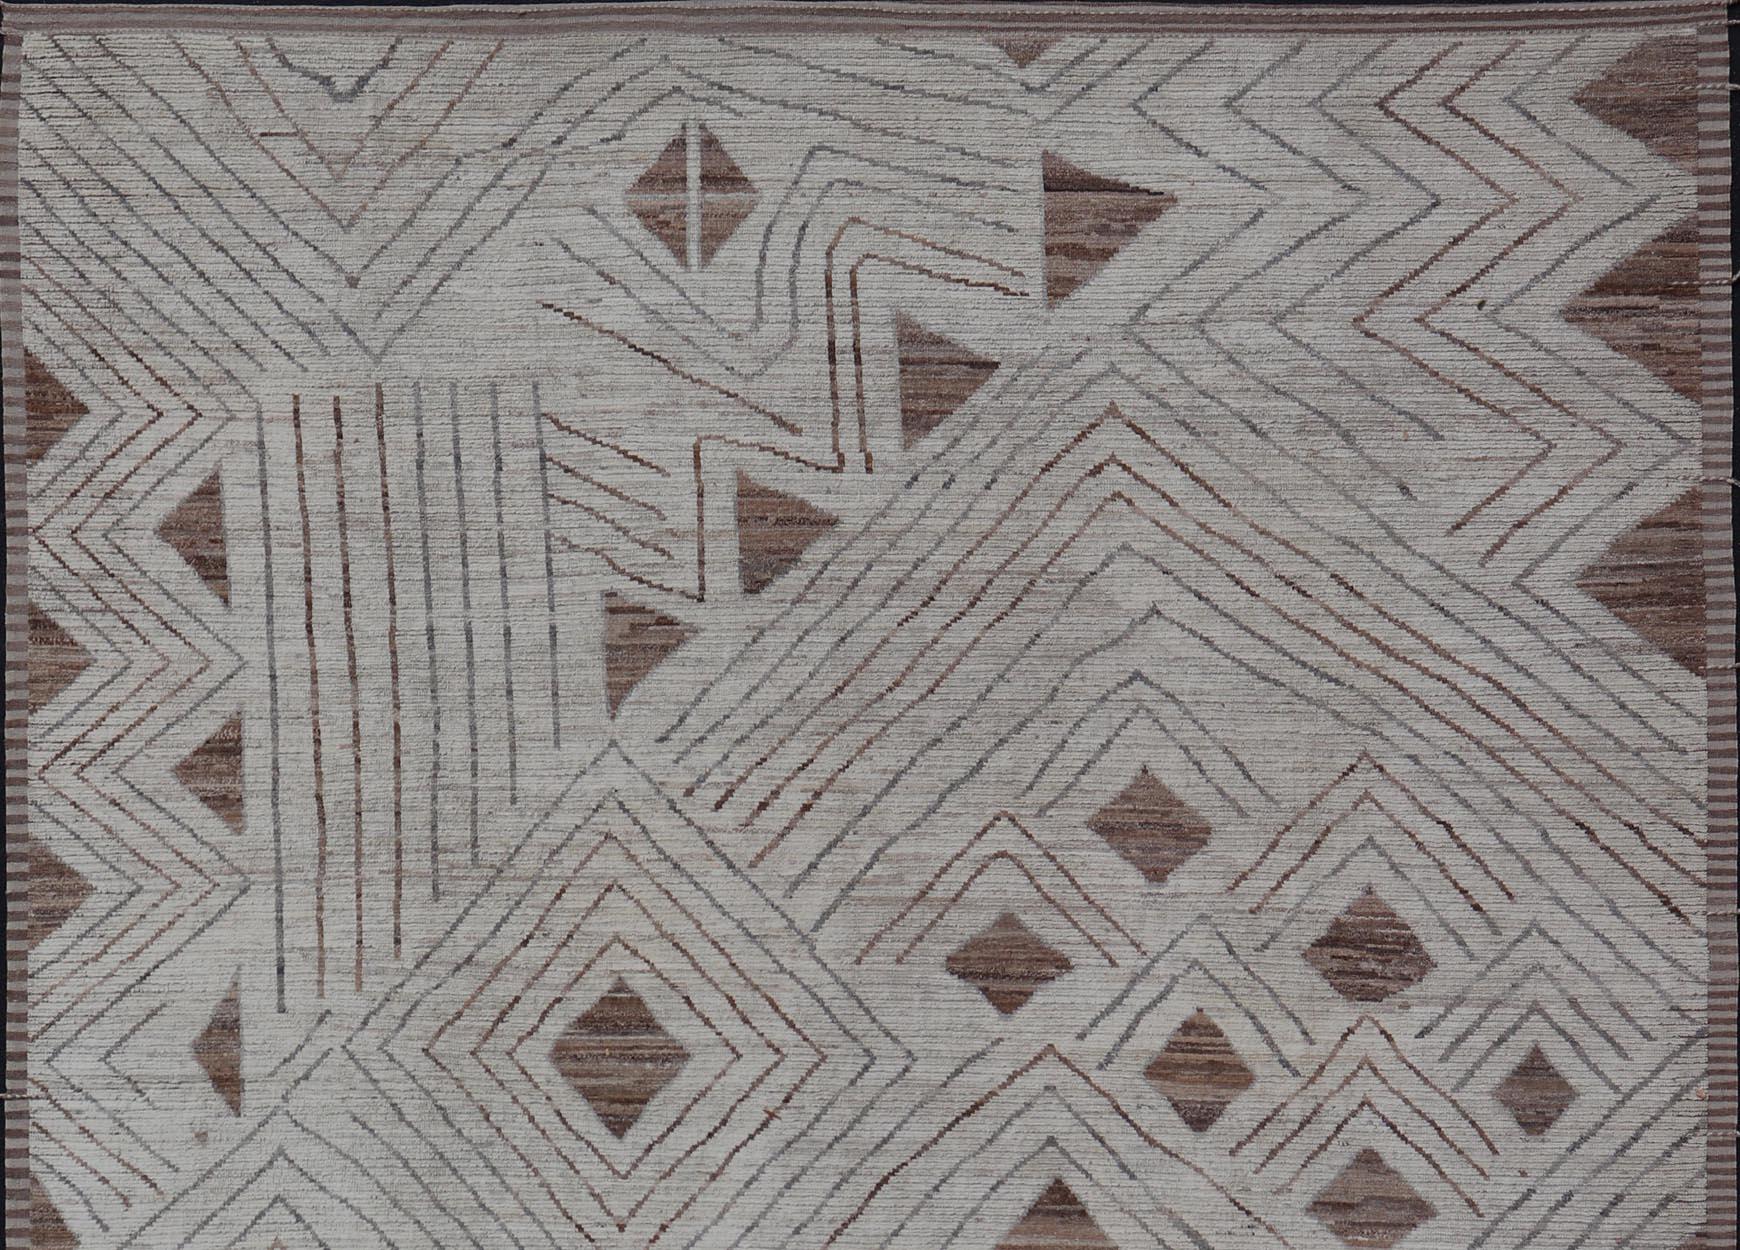 Fine Modern Rug in White & Light Brown Tones with Abstract & Geometric Design.
Hand Knotted Modern Casual Sub-Geometric Tribal Design in Neutral Tones.
 Country of Origin: Afghanistan Keivan Woven Arts; AFG-58215 Type: Modern Casual  Design: